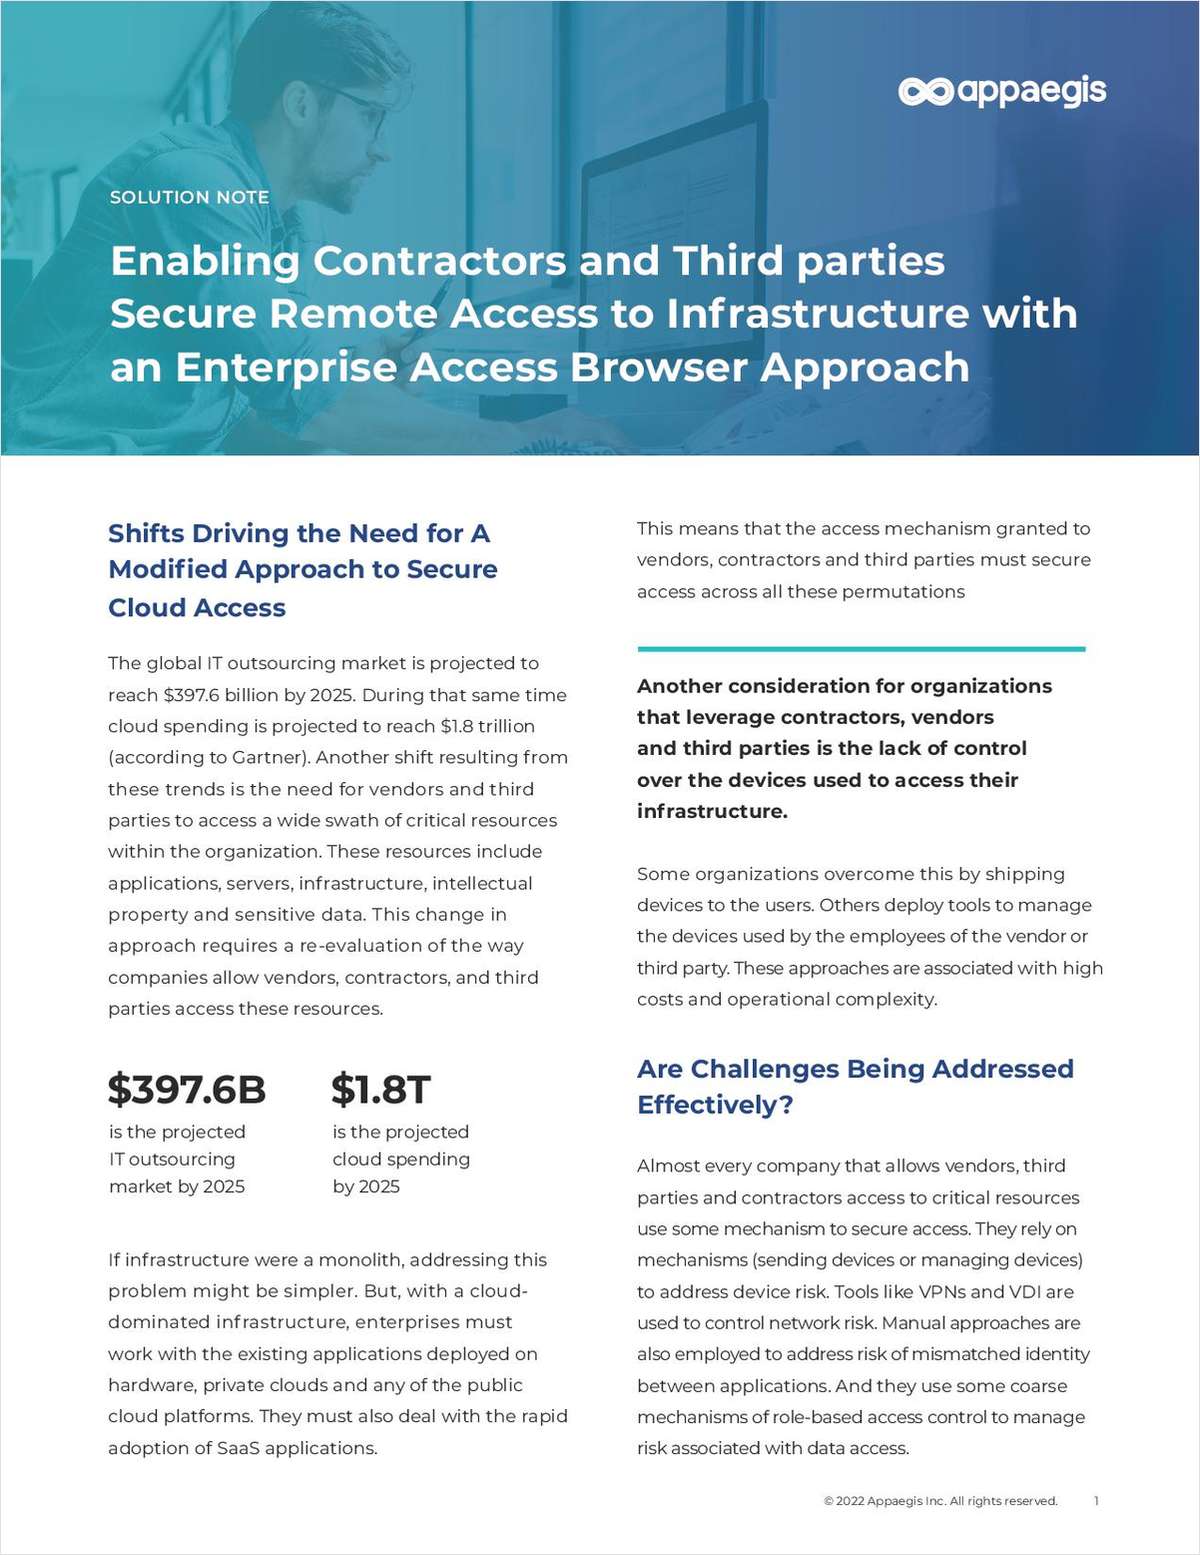 Deploying enterprise access browser to secure access of contractors and third-parties